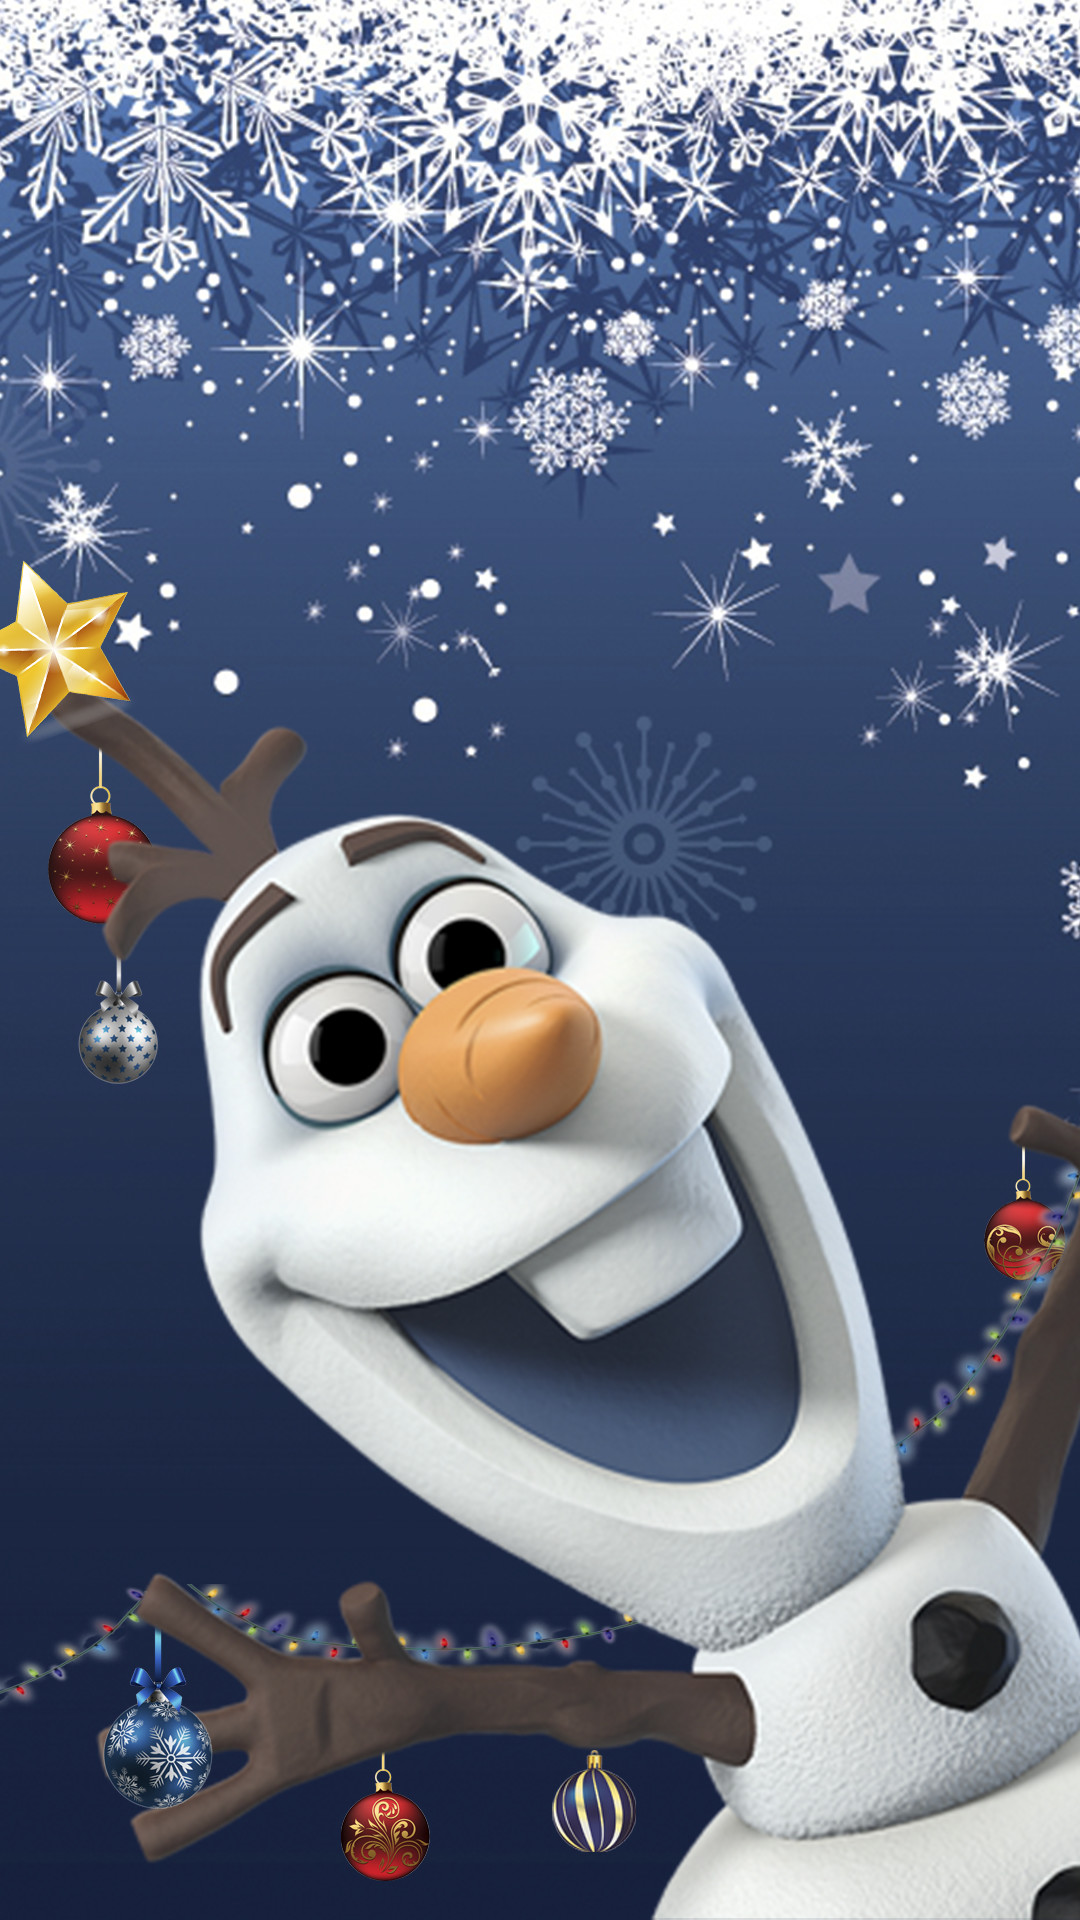 Christmas Olaf Wallpapers Backgrounds (55+ images)